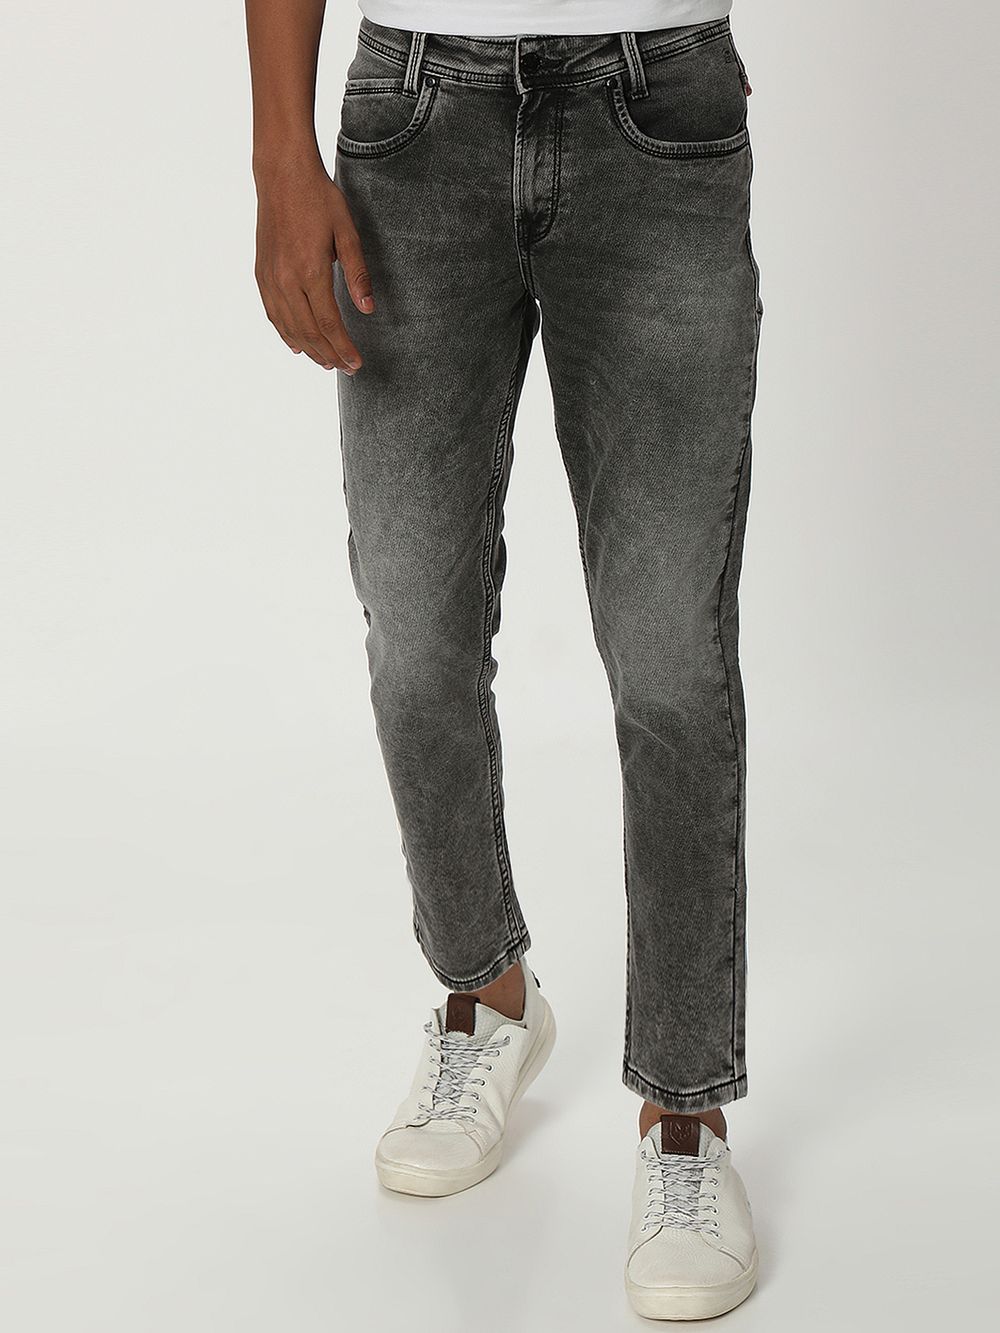 Grey Ankle Length Denim Deluxe Stretch Jeans